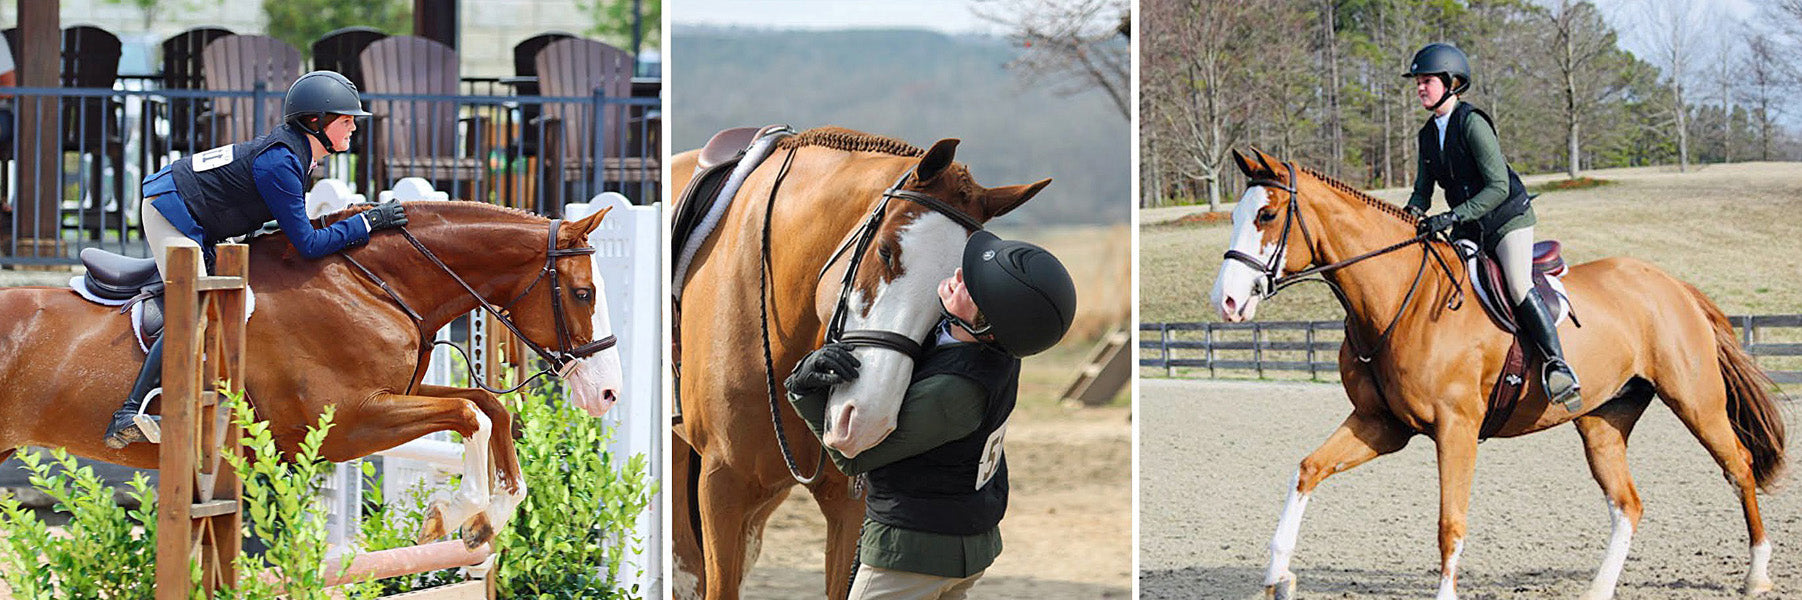 Equestrian equipment to keep you stylish and safe from Ride EquiSafe